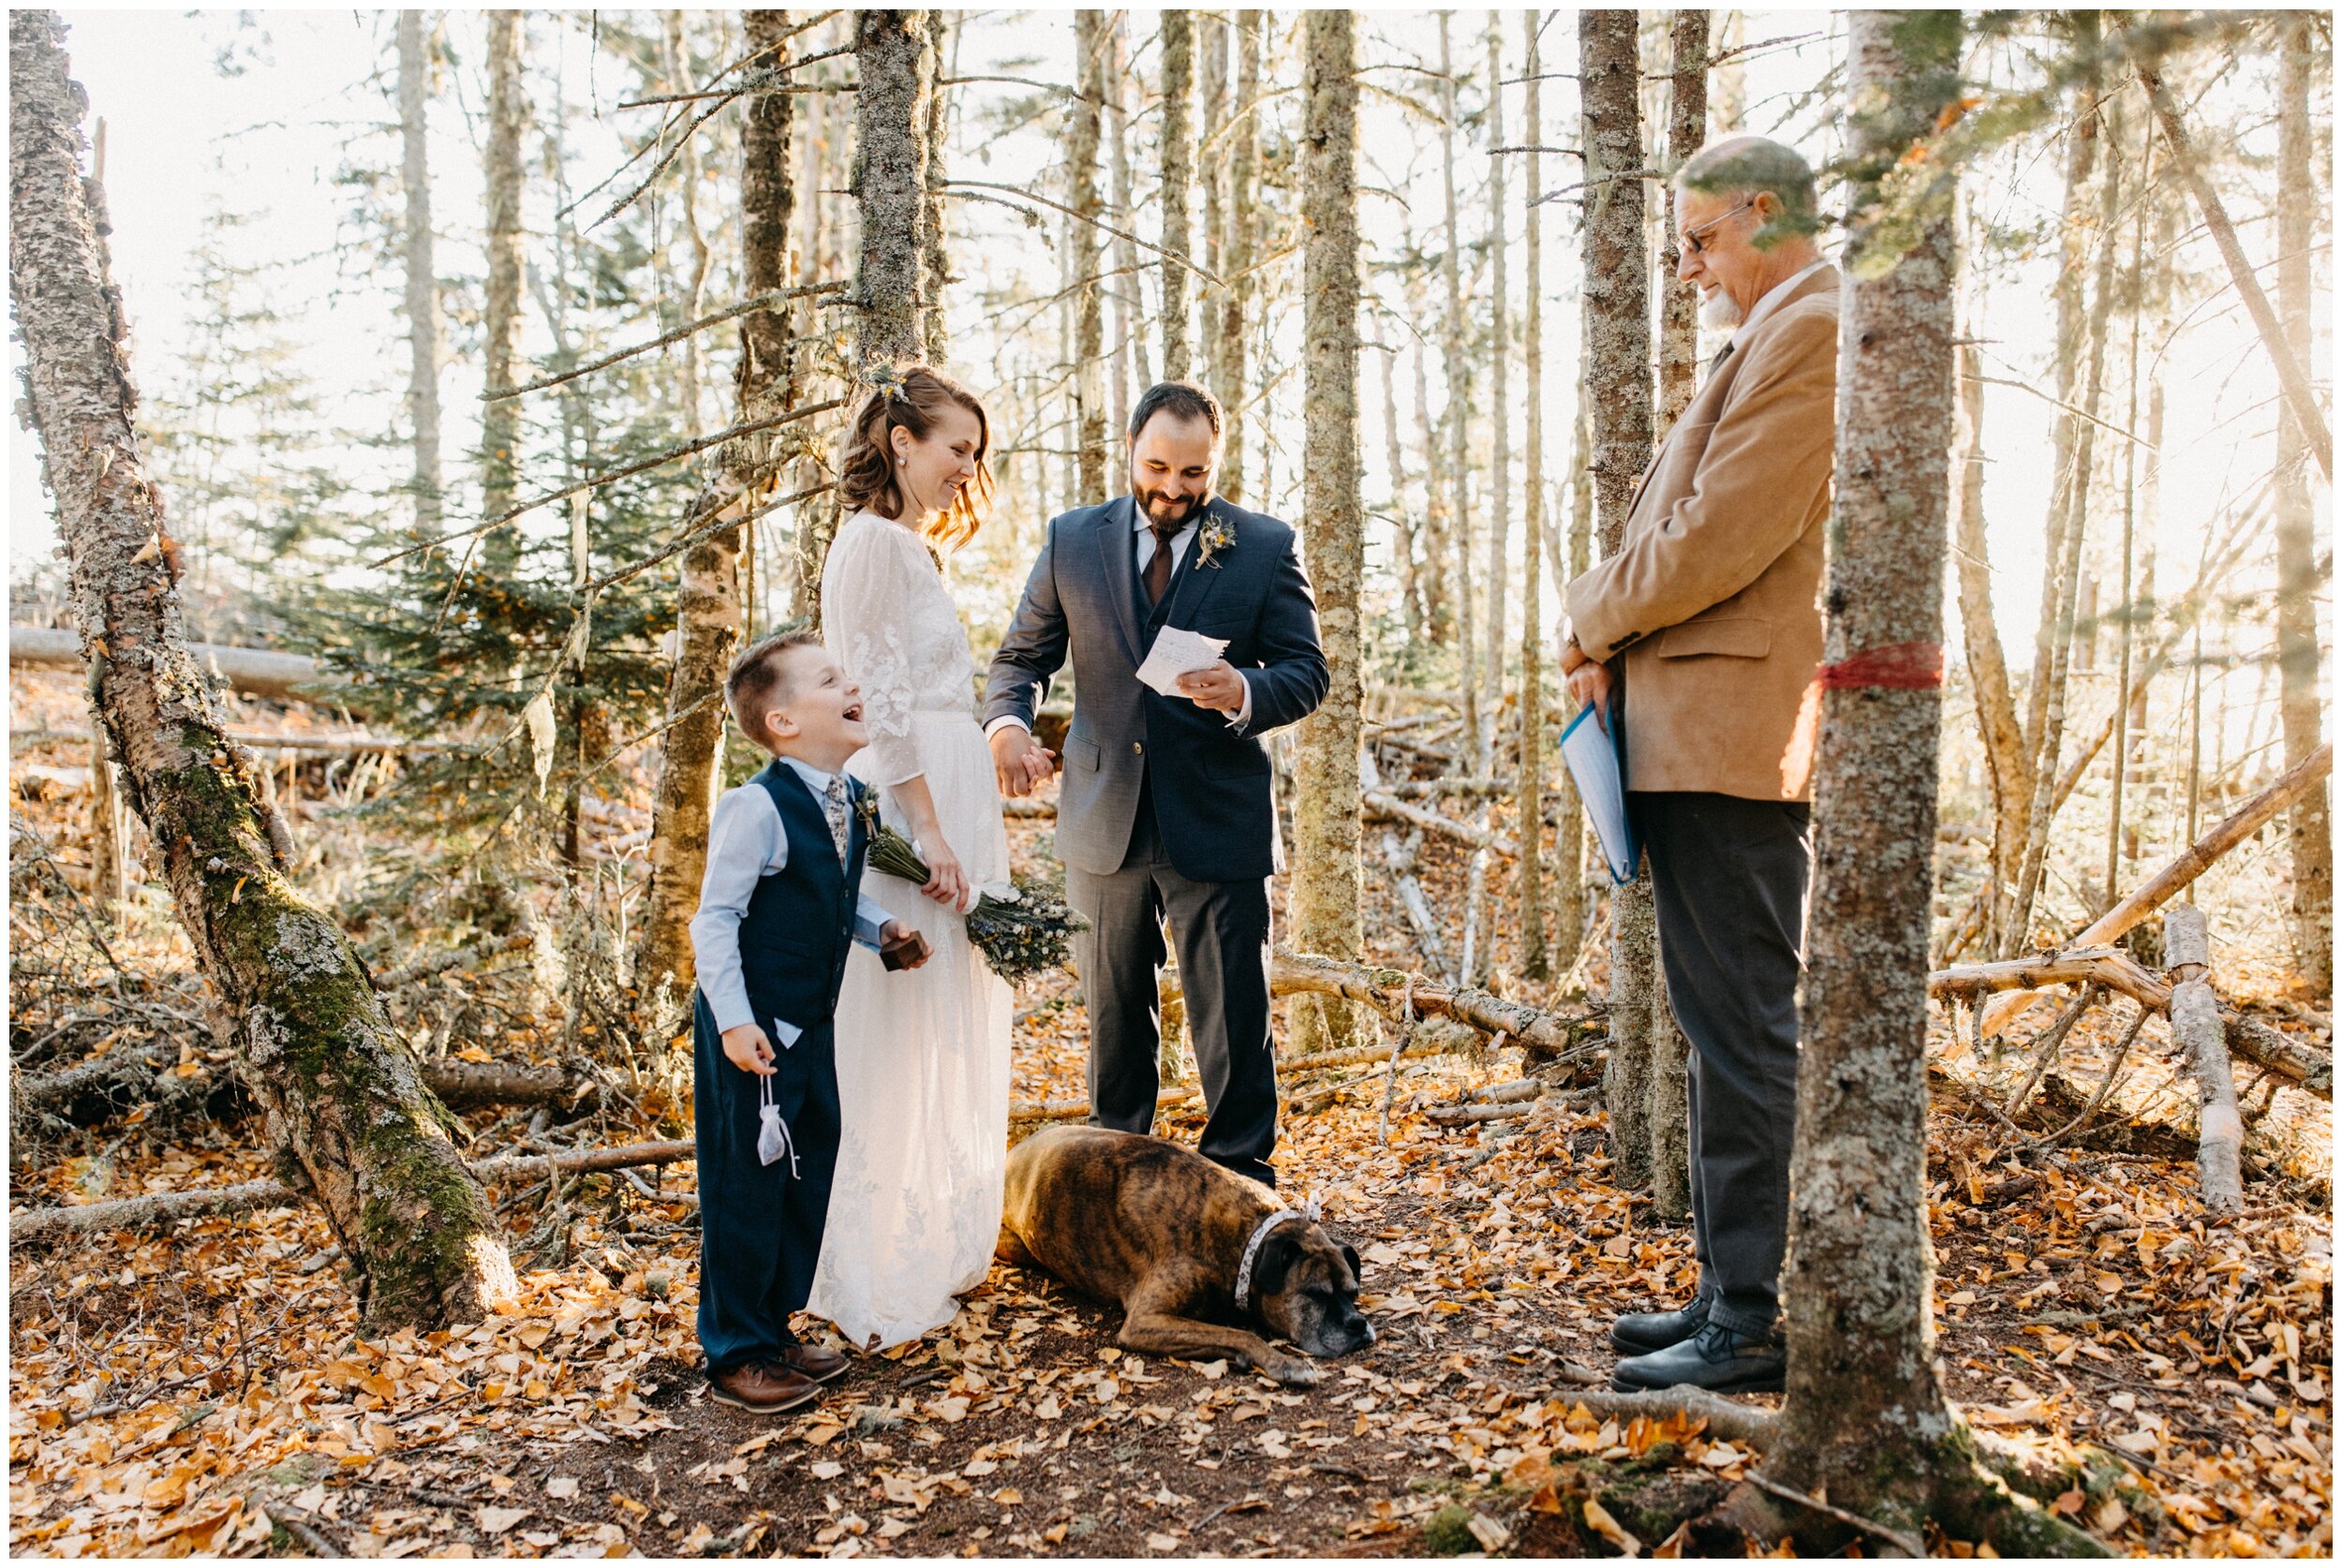 Groom reading wedding vows during intimate ceremony in the woods on Artists' Point